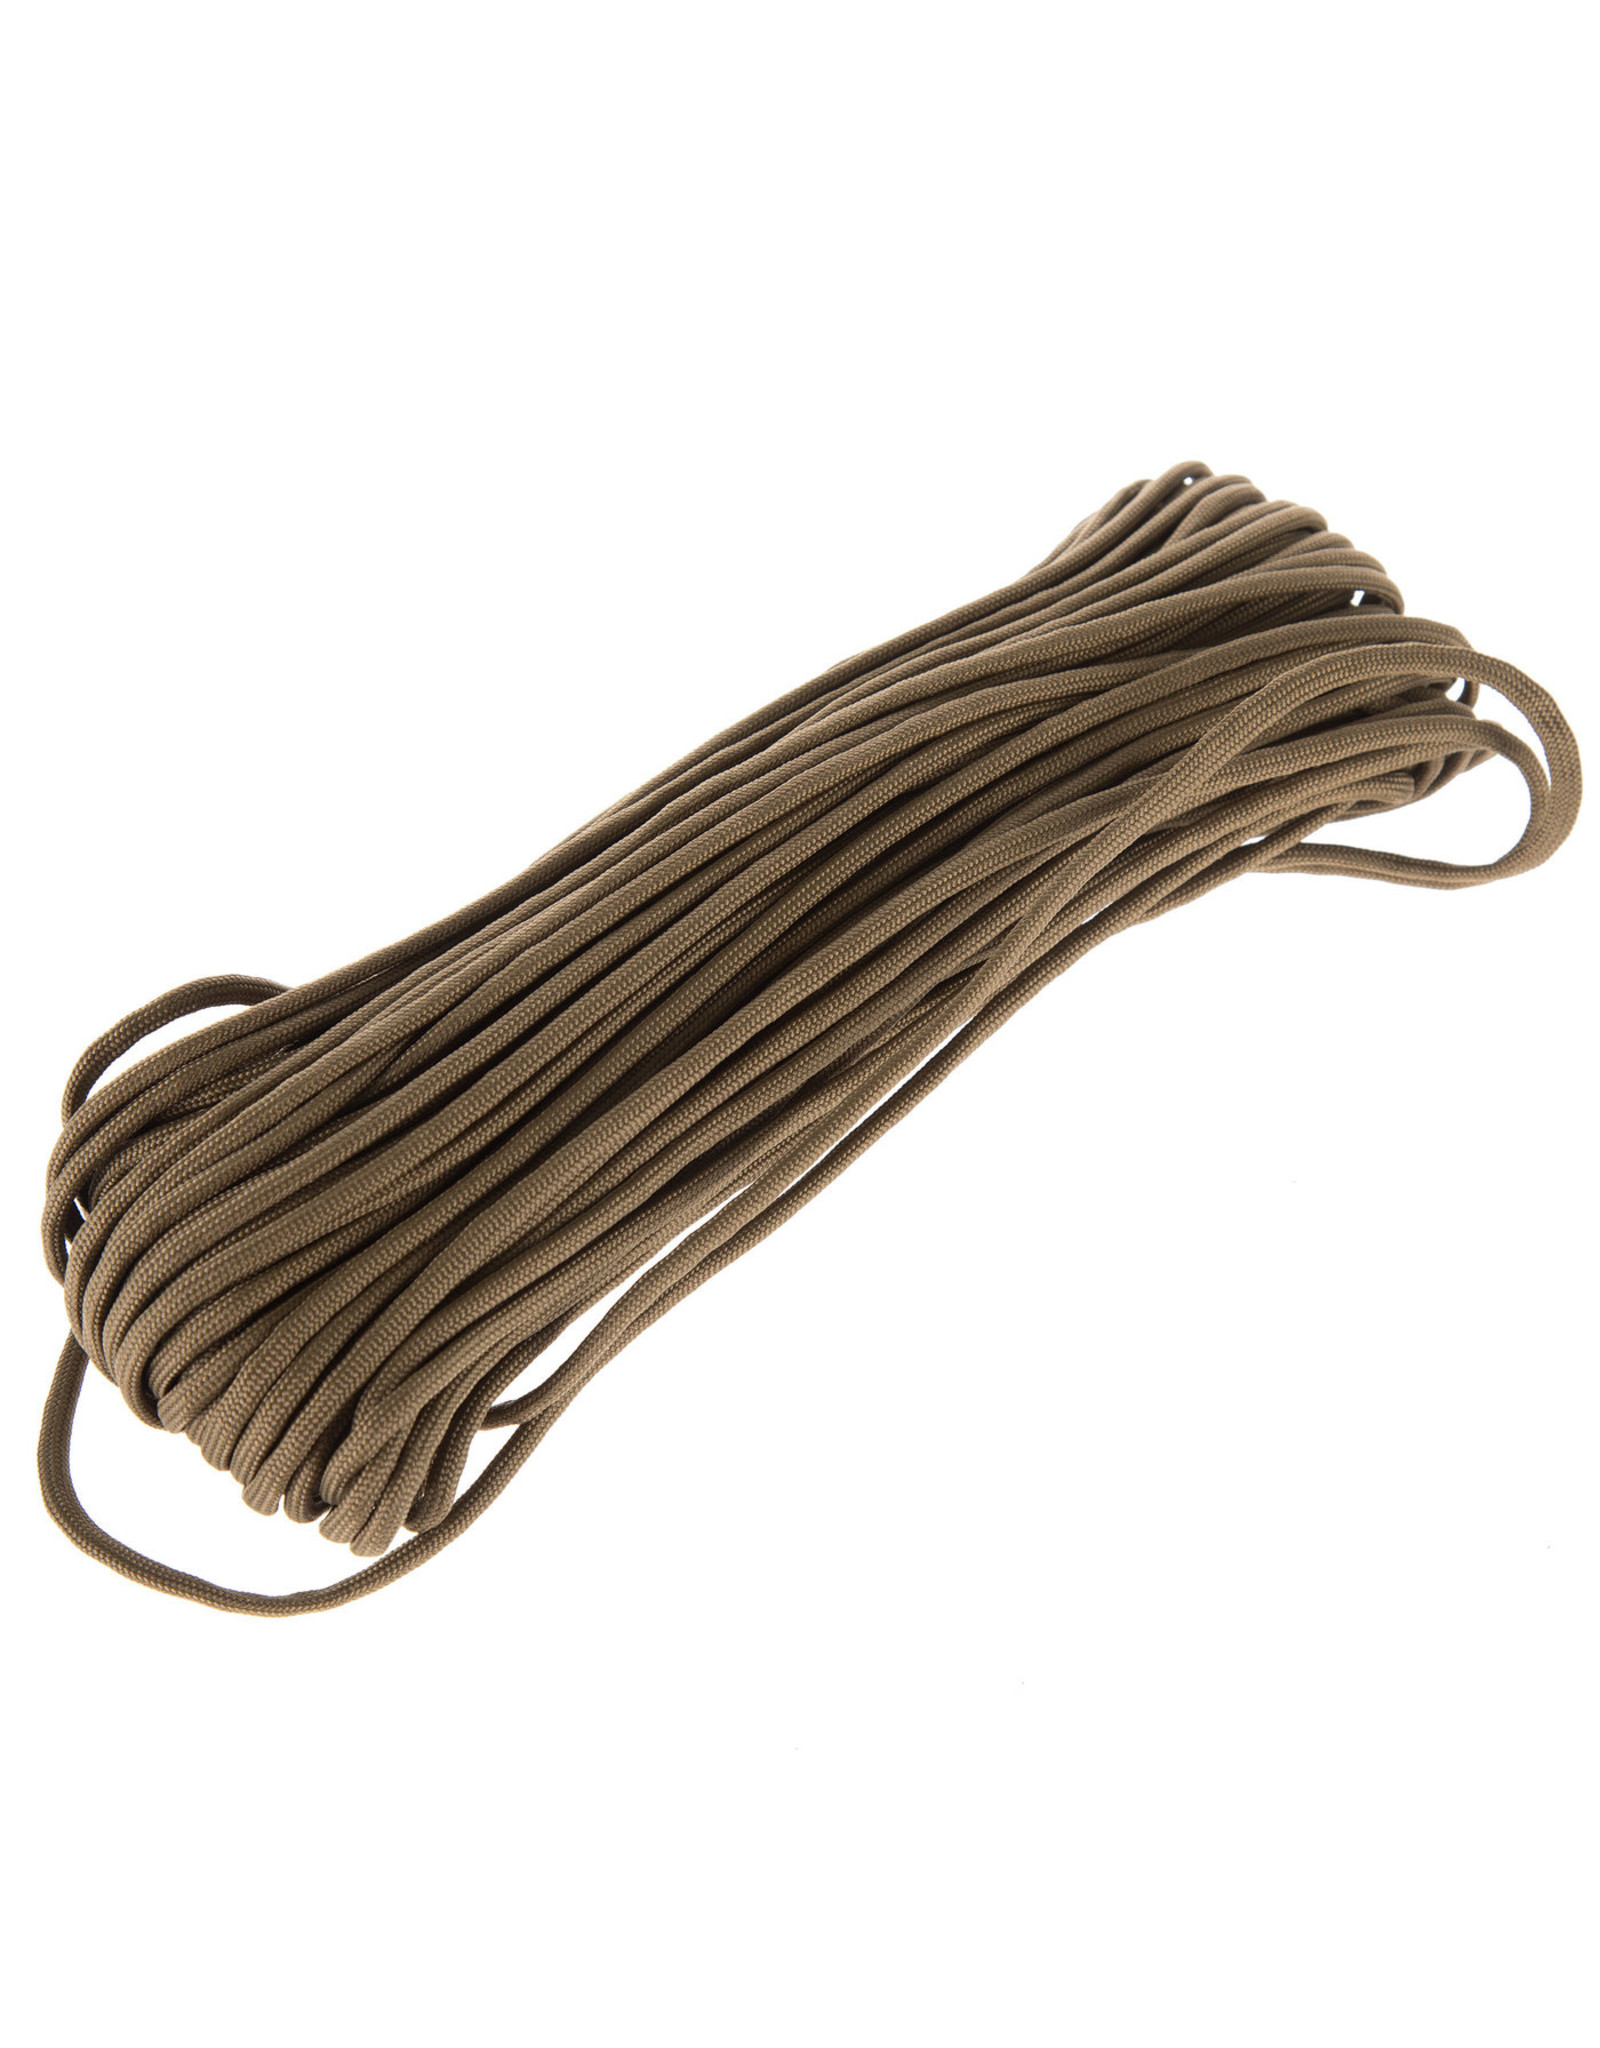 Paracord 50 ft. Coyote Brown